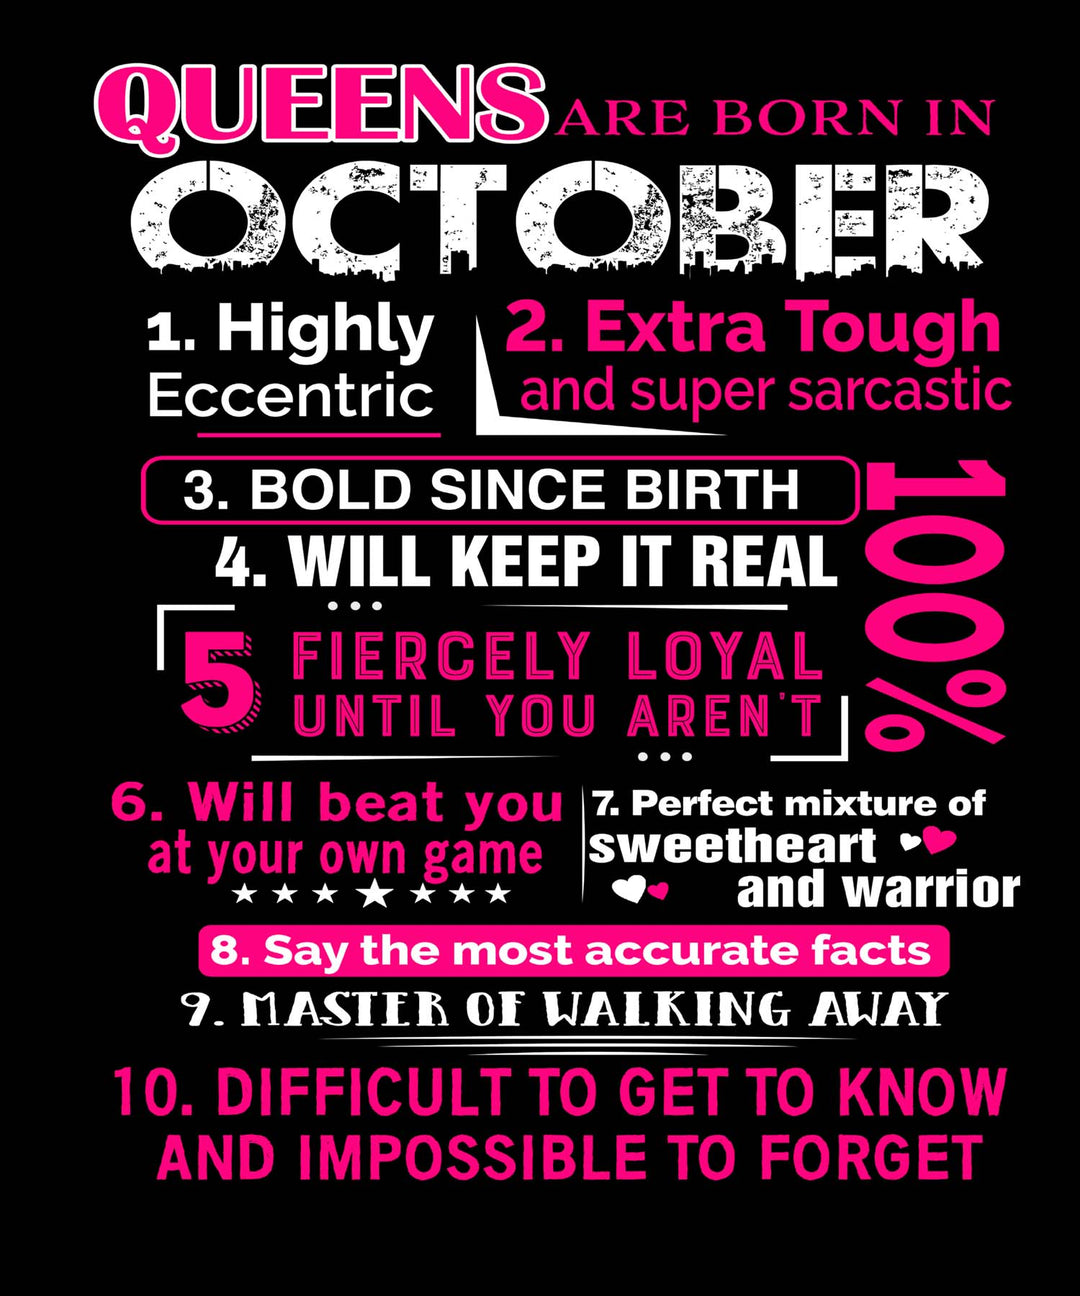 10 REASONS QUEENS ARE BORN IN OCTOBER